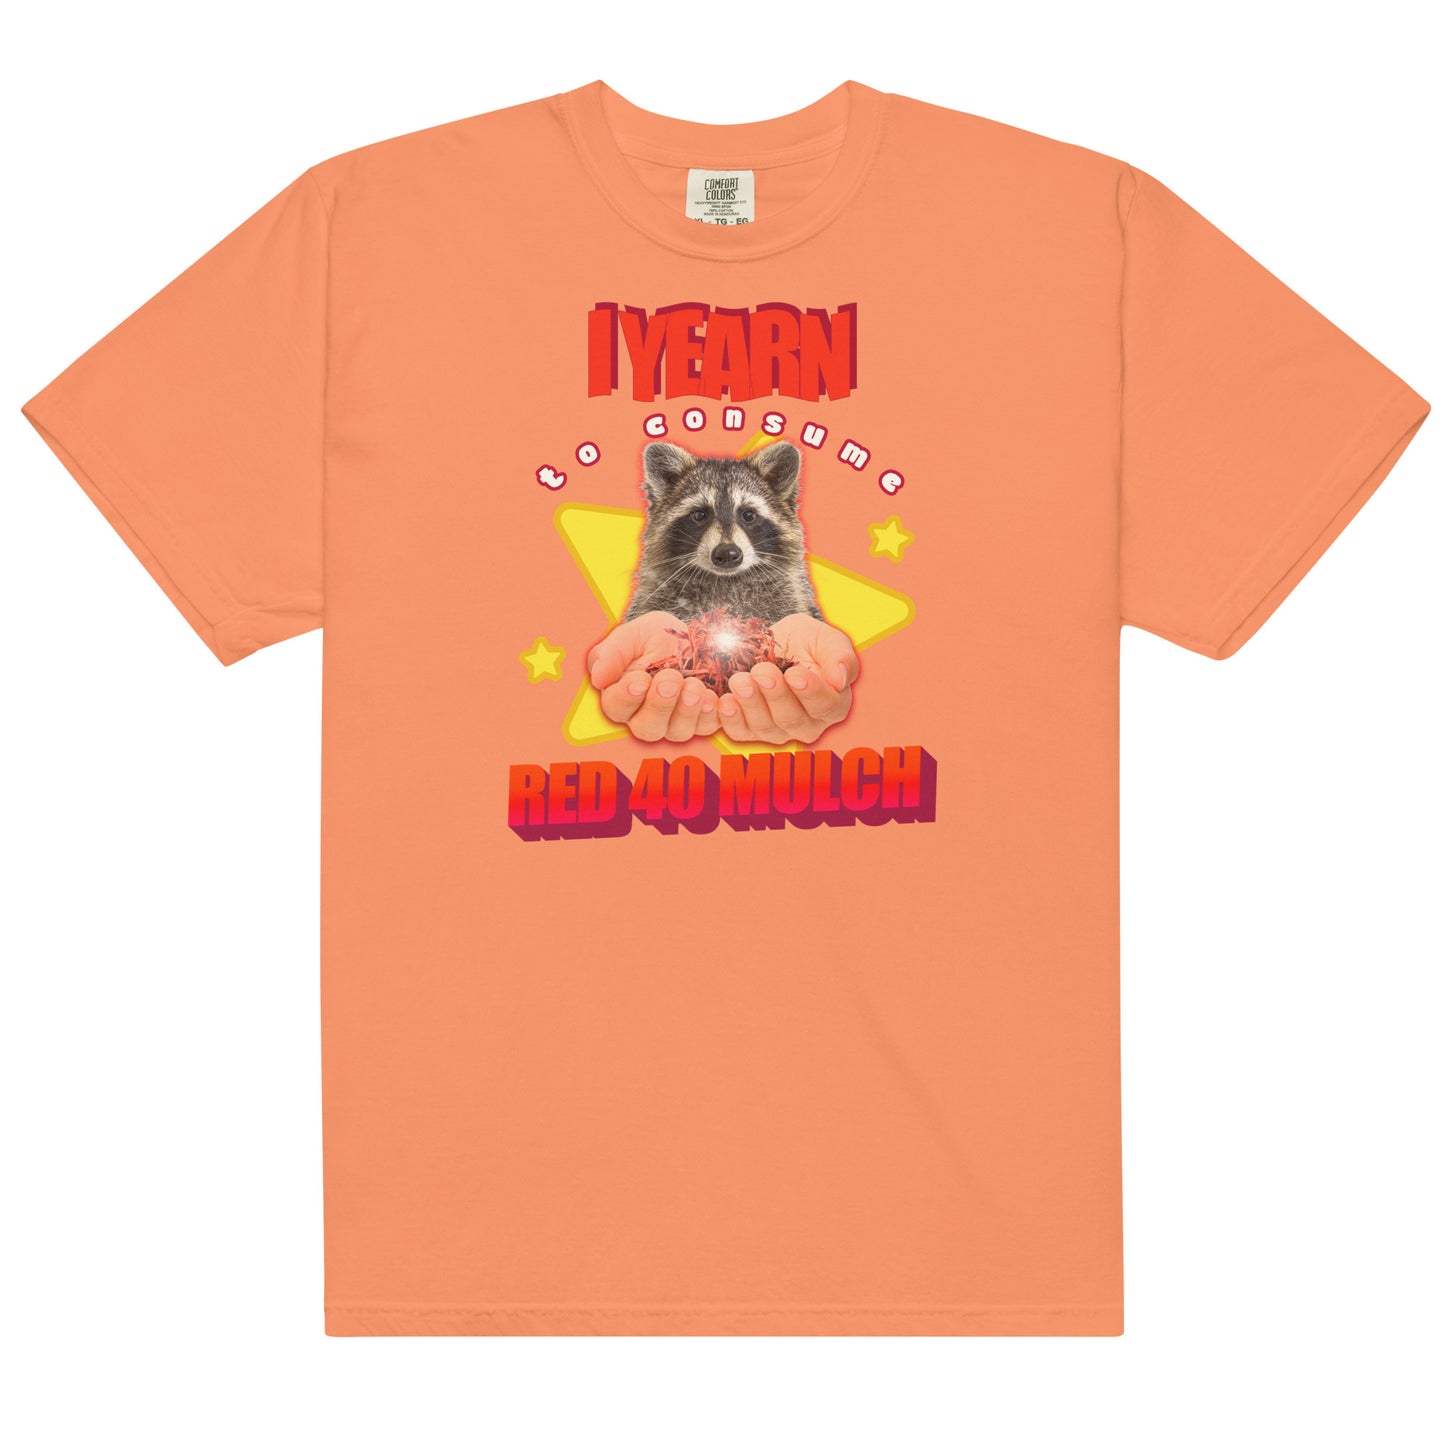 I Yearn to Consume Red 40 Mulch Unisex t-shirt